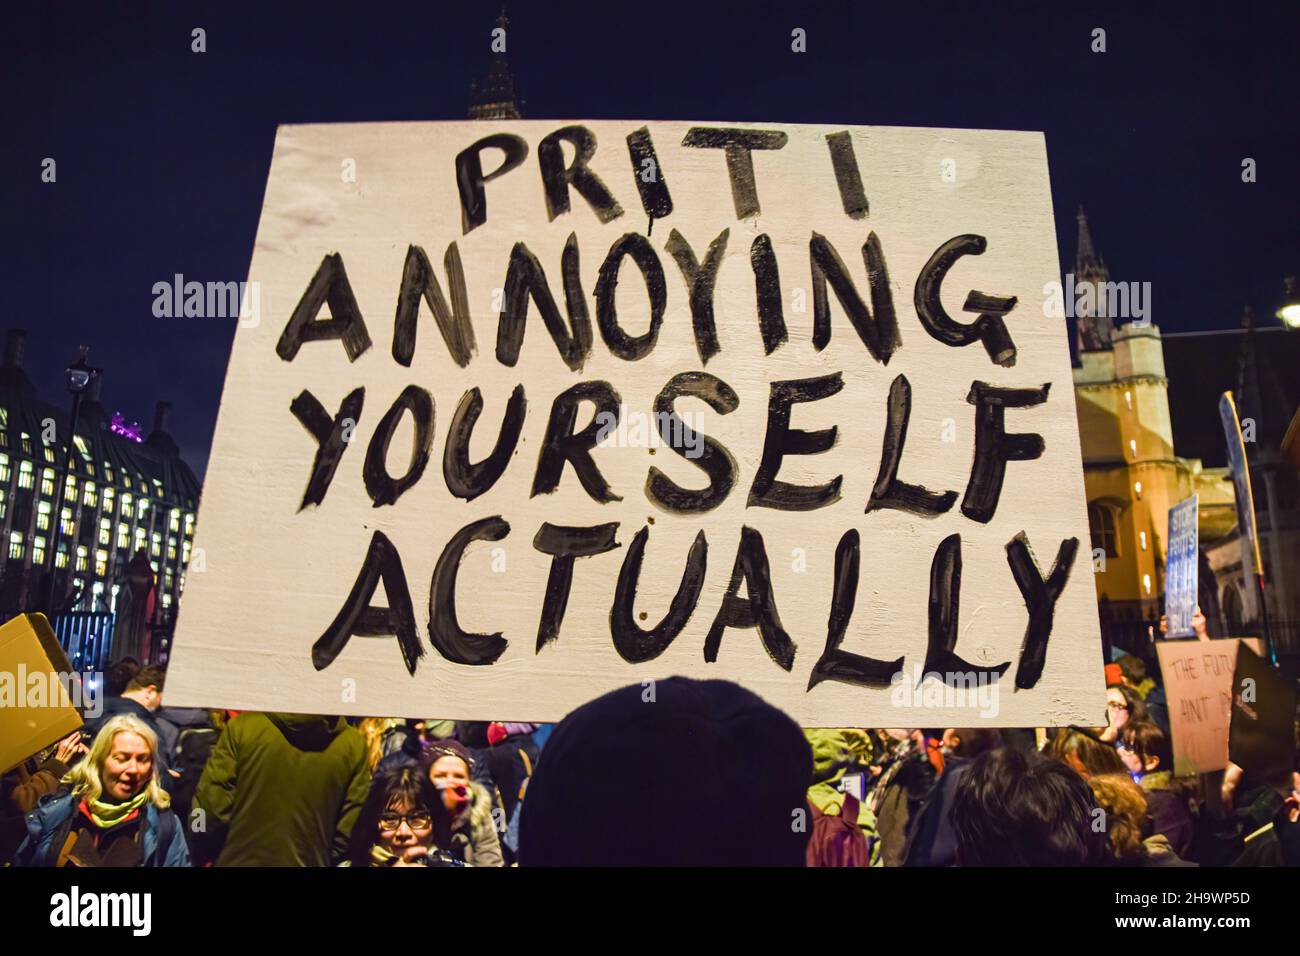 London, UK. 08th Dec, 2021. A protester holds a placard which says 'Priti Annoying Yourself Actually' in reference to the Home Secretary, Priti Patel during the demonstration. Demonstrators gathered outside the Houses of Parliament in protest against the Police, Crime, Sentencing and Courts Bill, which critics say will make many forms of protest illegal. Credit: SOPA Images Limited/Alamy Live News Stock Photo